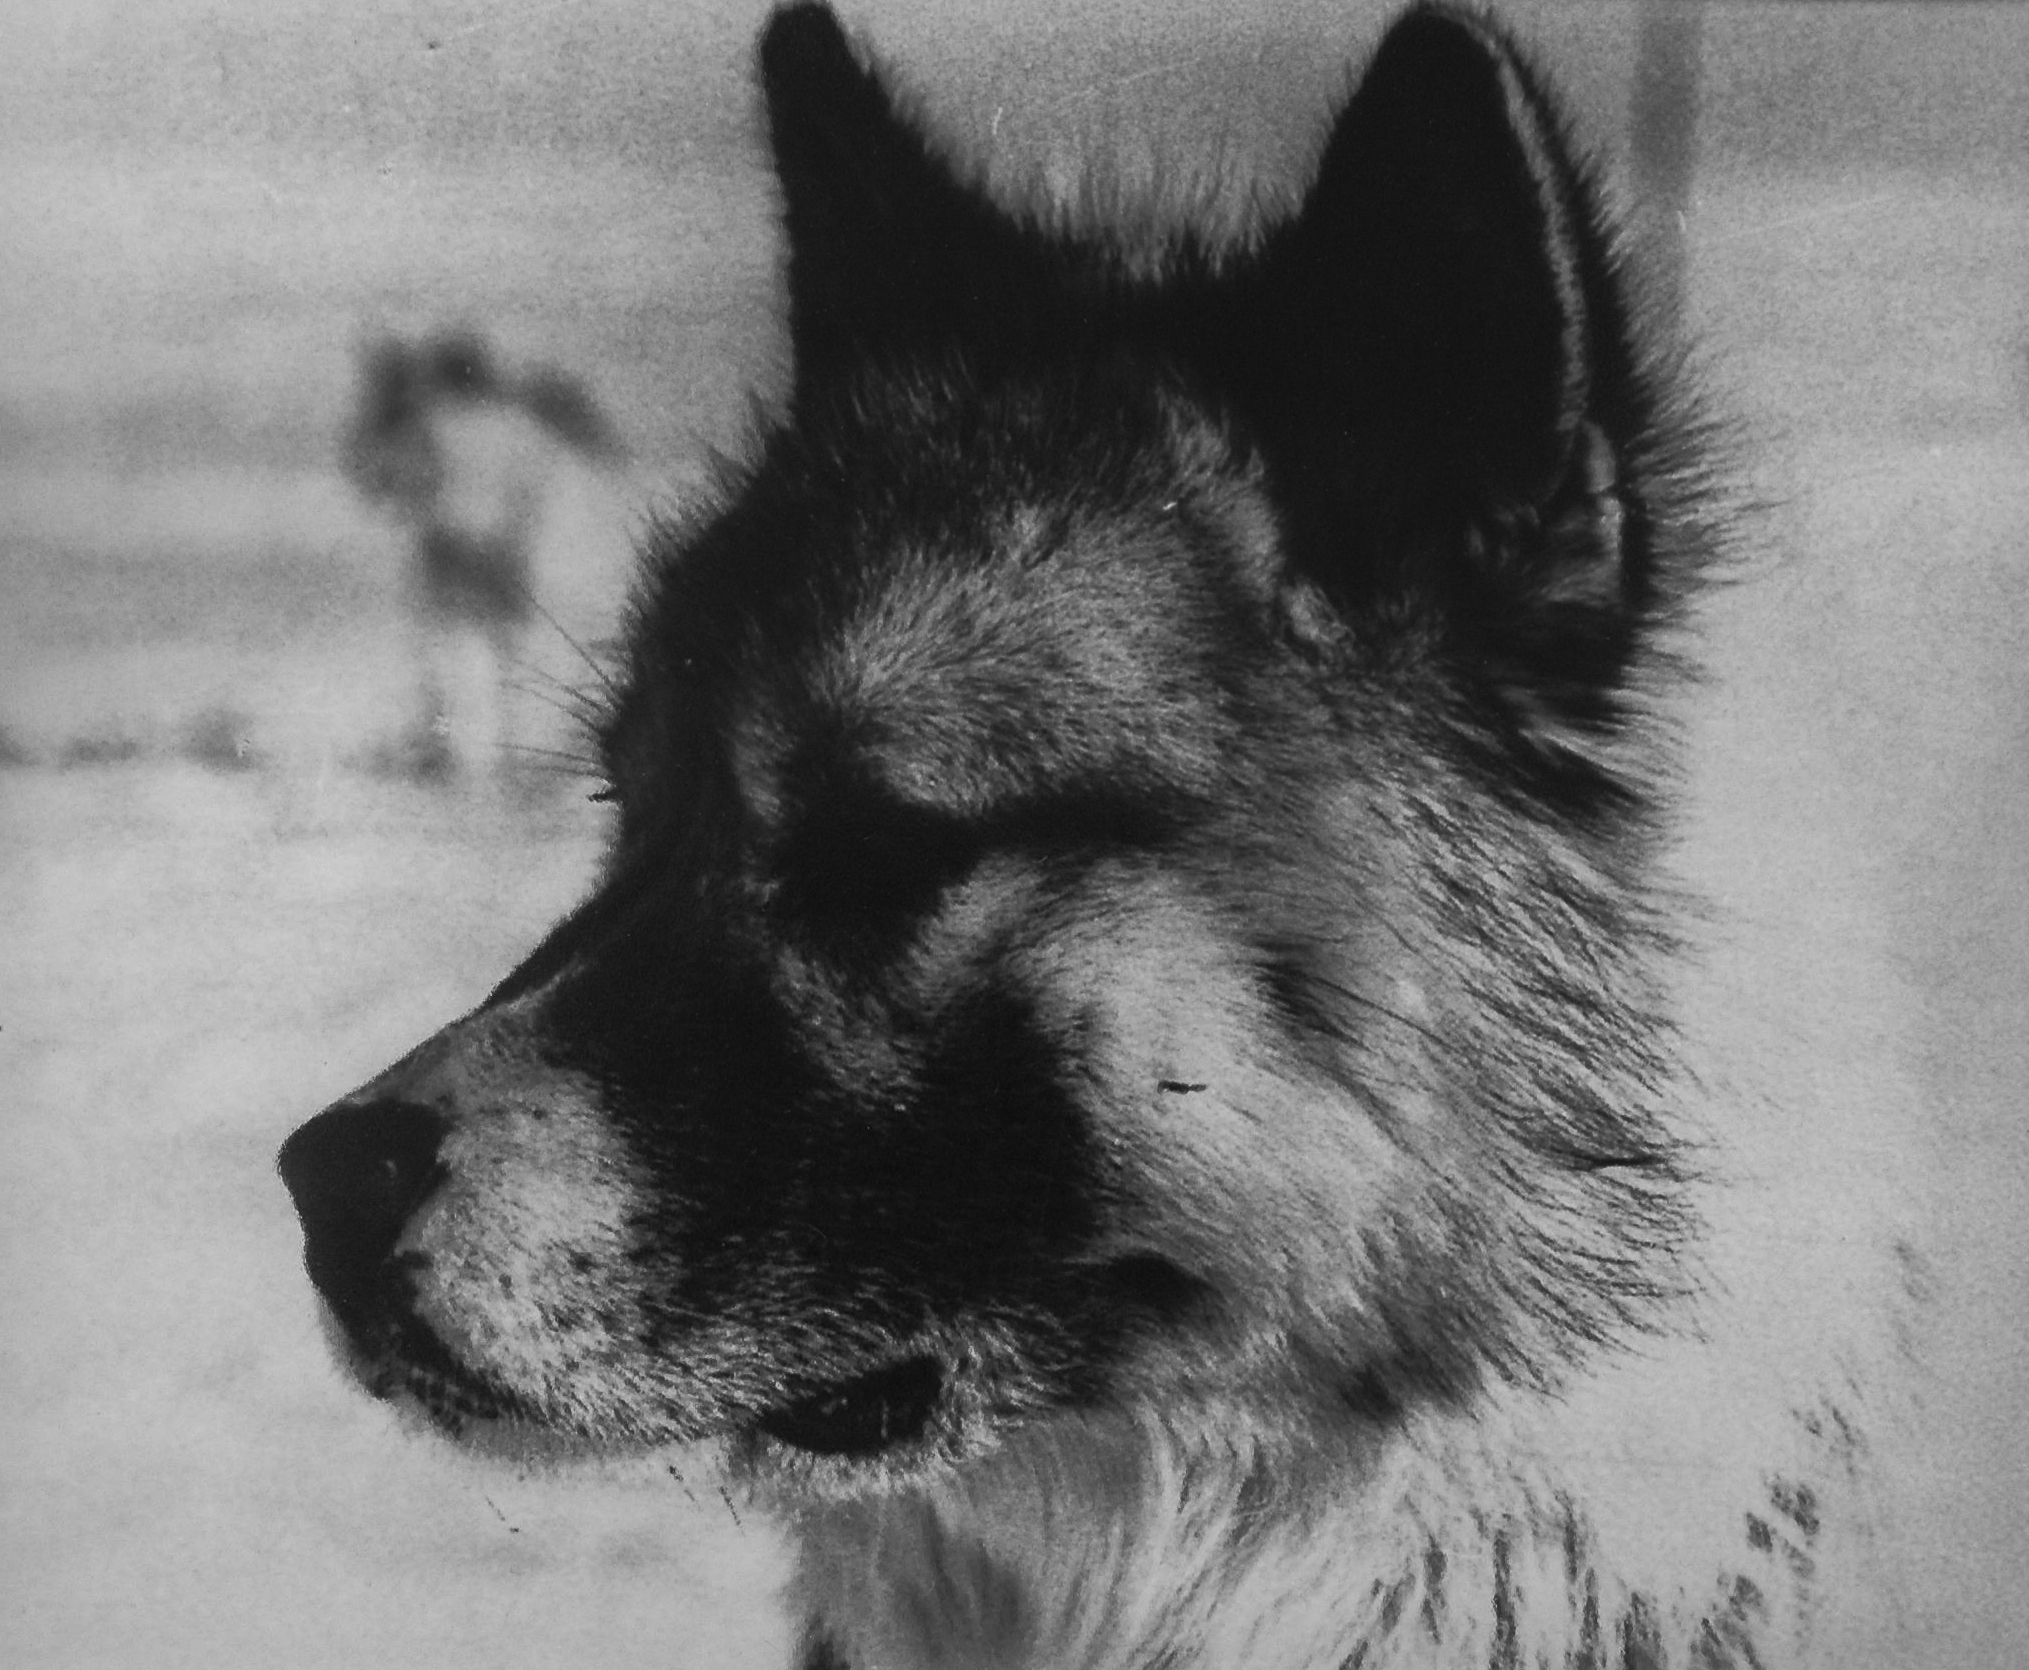 Huskies were eventually replaced by tractors and their departure was mourned by polar teams. Image: Supplied